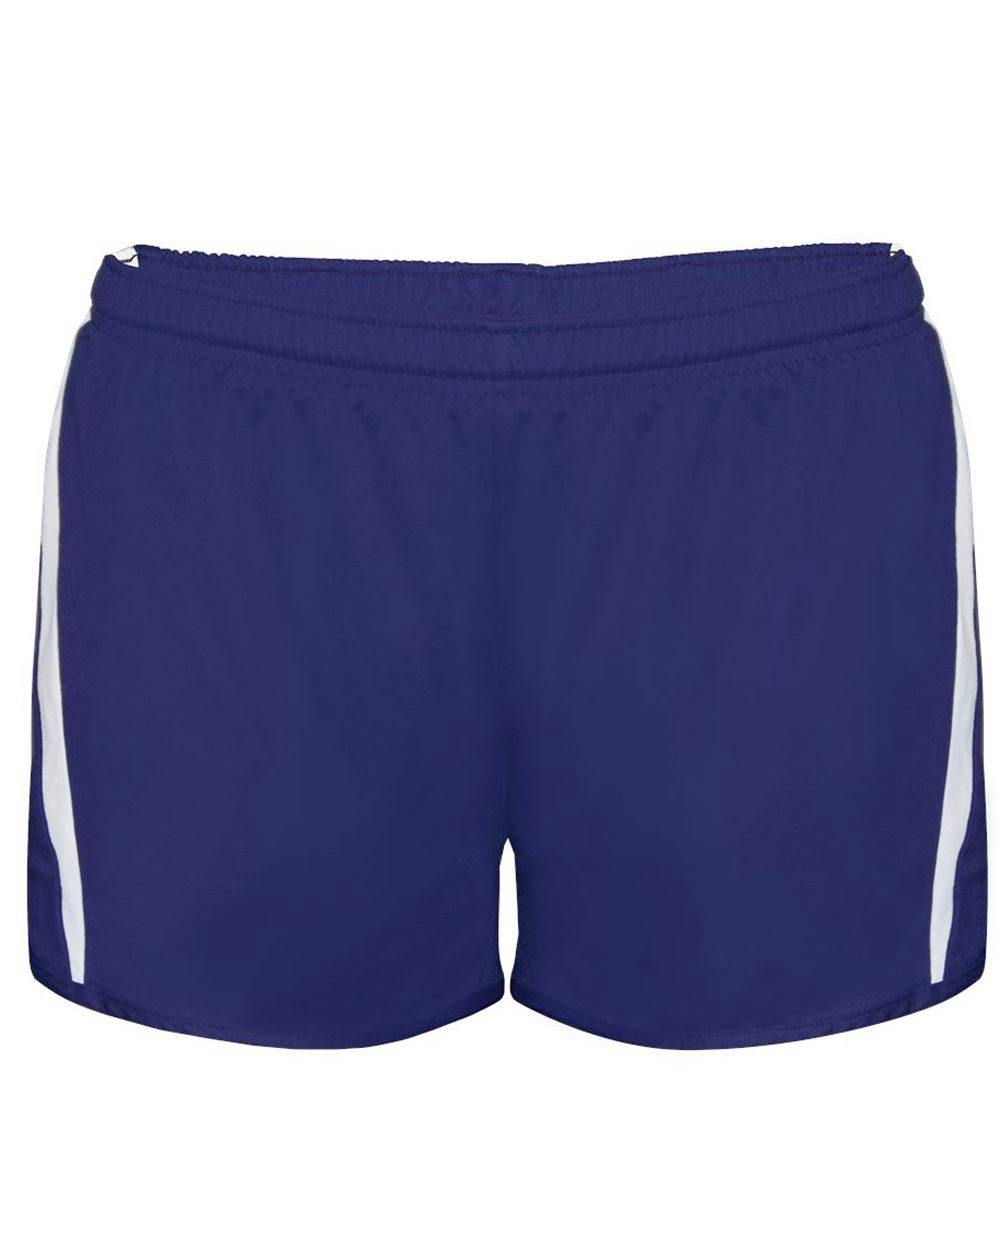 Image for Women's Stride Shorts - 7274